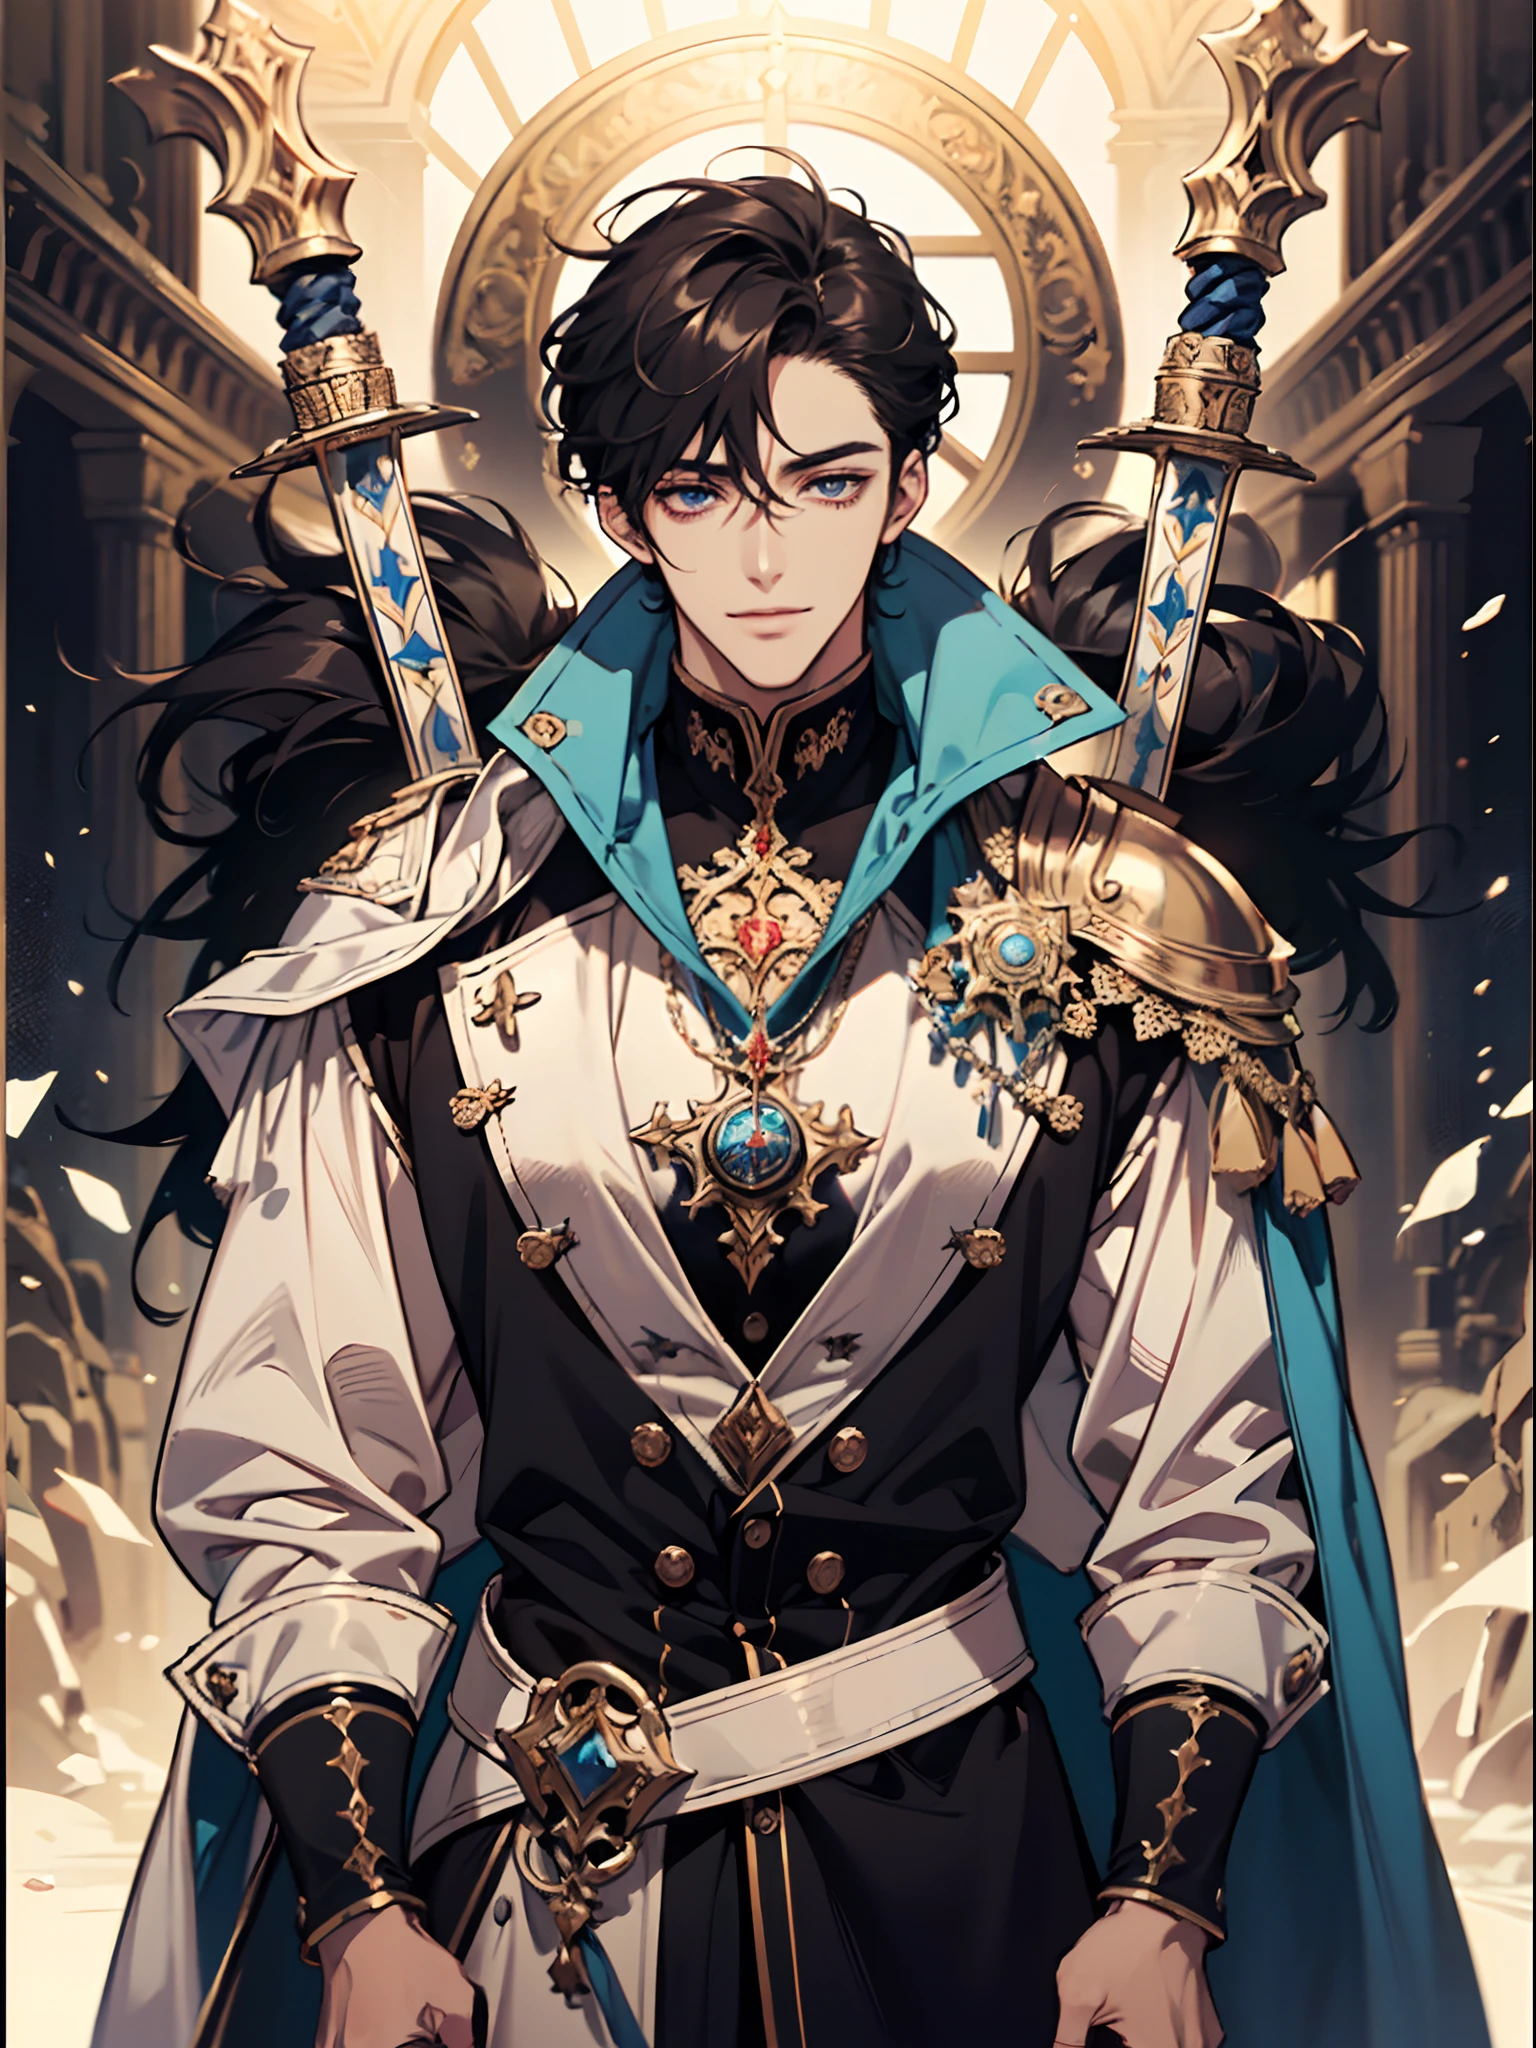 (absurderes, A high resolution, Ultra detailed), 1 male, Adult, Handsome, tall muscular guy, Broad shoulders, finely detailed eyes and detailed face, Knights \tarot\, royal knights, Armor, sword, Symbolism, visual art, occult, universal, Visual projection, Philosophy, Iconography, Numerology, popularity, Alfonse Mucha, Smile, Artistic